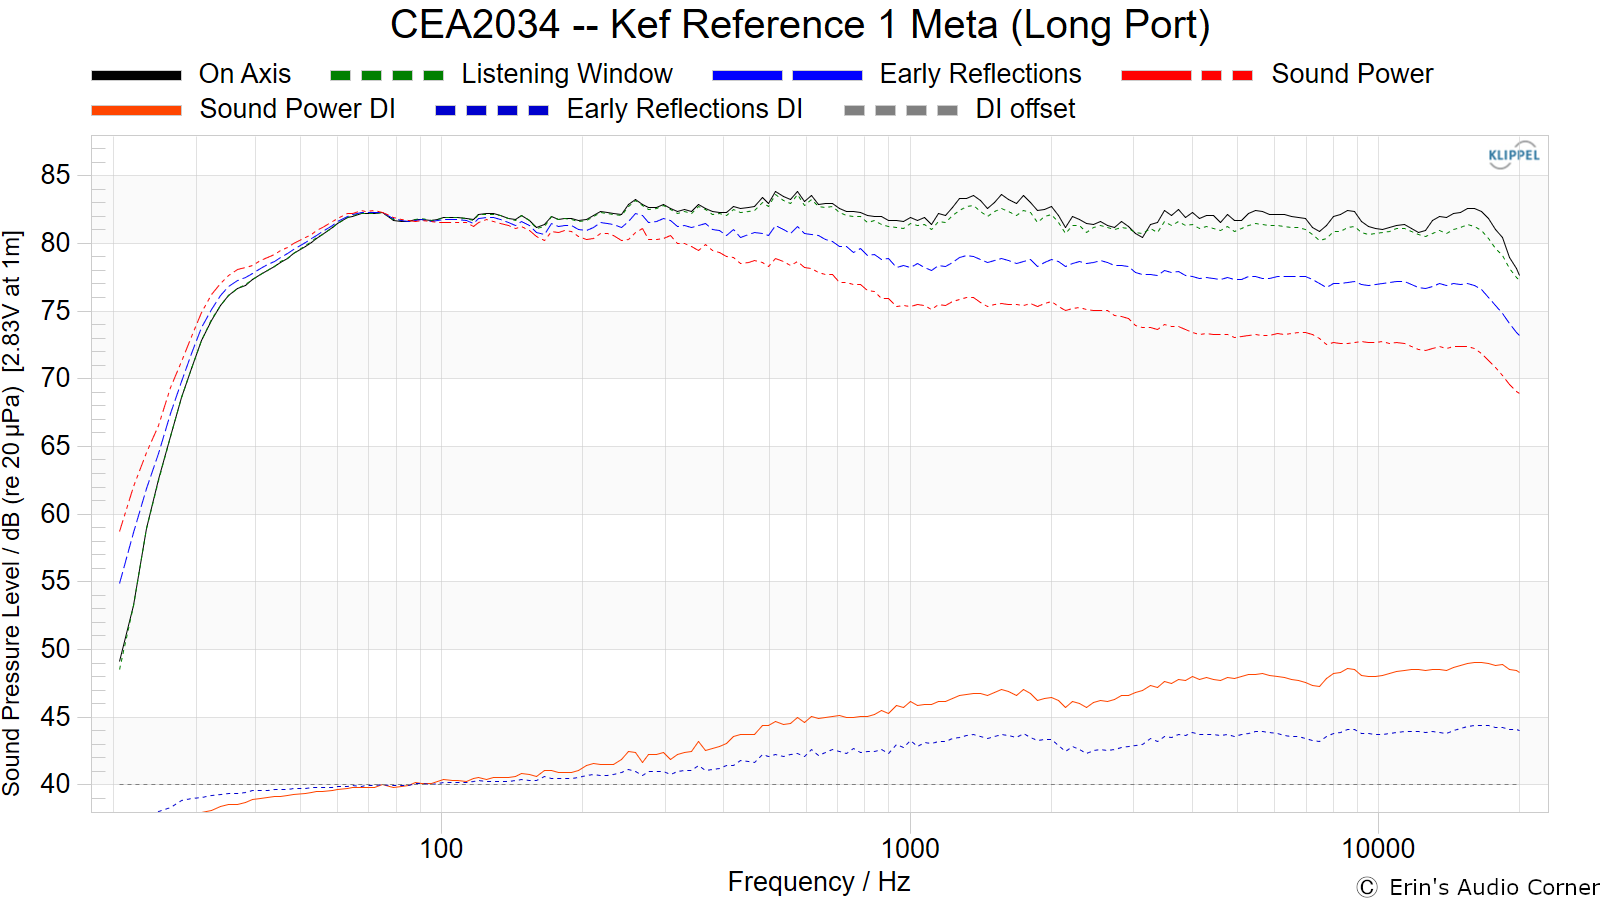 CEA2034 -- Kef Reference 1 Meta (Long Port).png